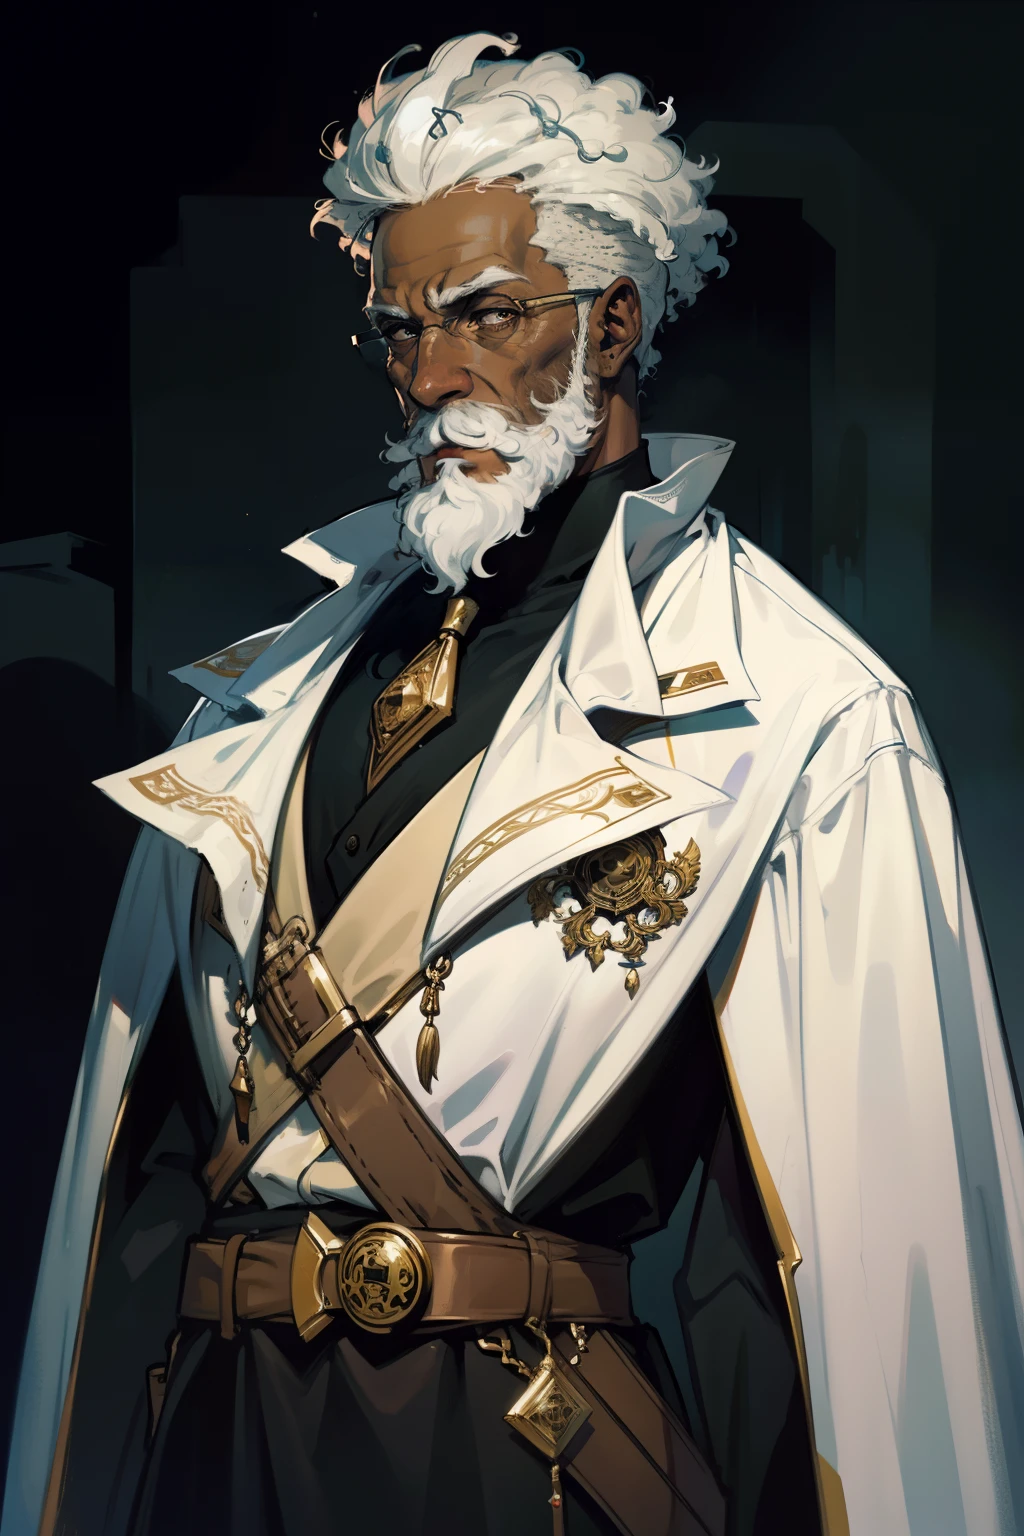 "An elegant, middle-aged black male with a distinguished short afro white hair and a well-groomed stubble beard wearing a sophisticated military robe. Masterpiece-level artwork of the highest quality."